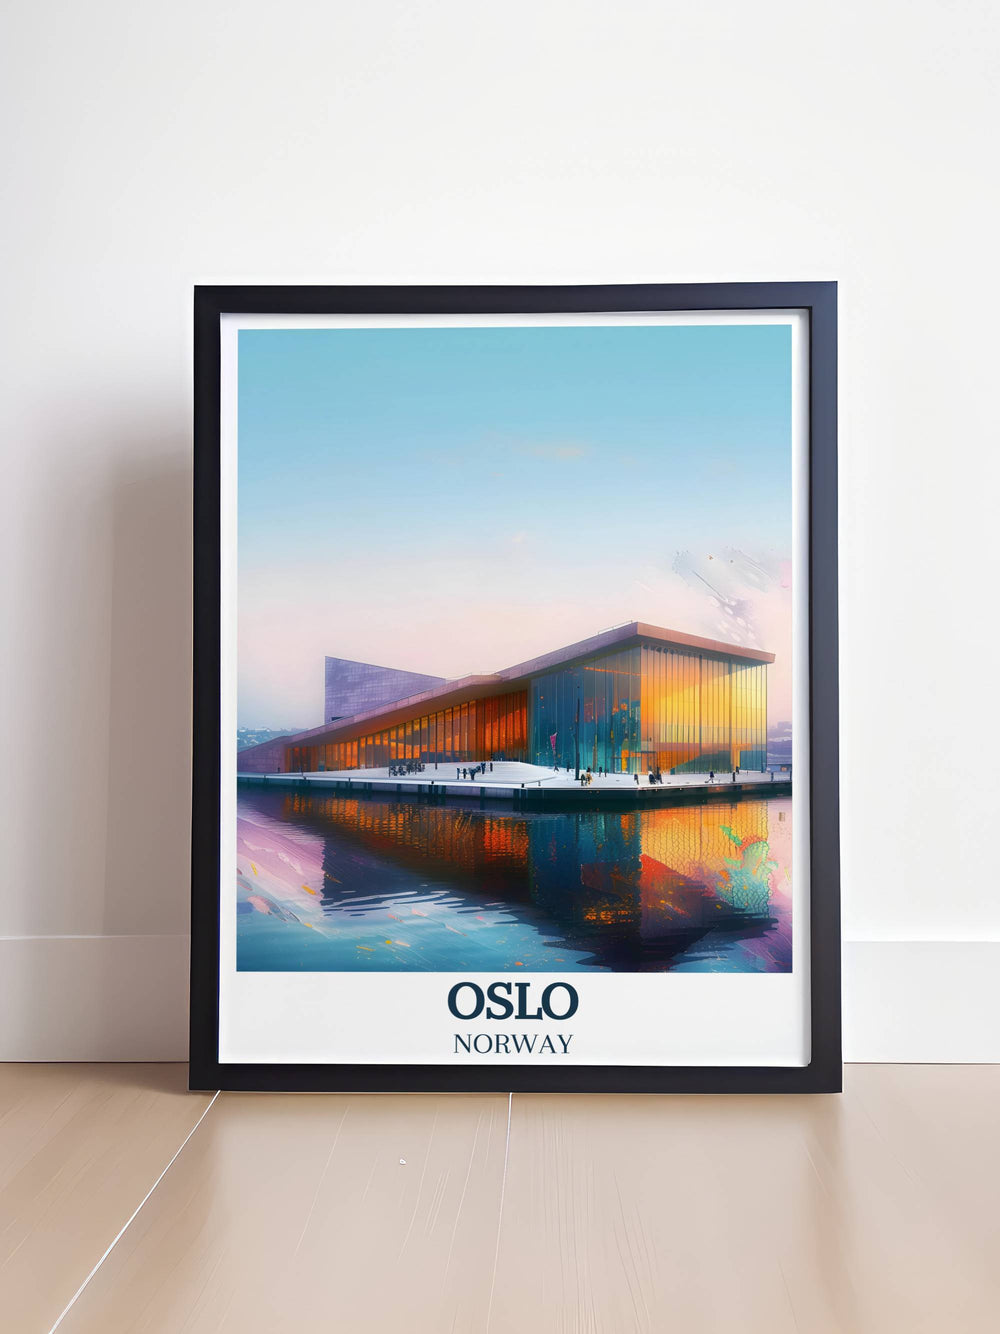 Framed art print of Oslo Norway, capturing the elegance and charm of the citys historic streets and modern landmarks.